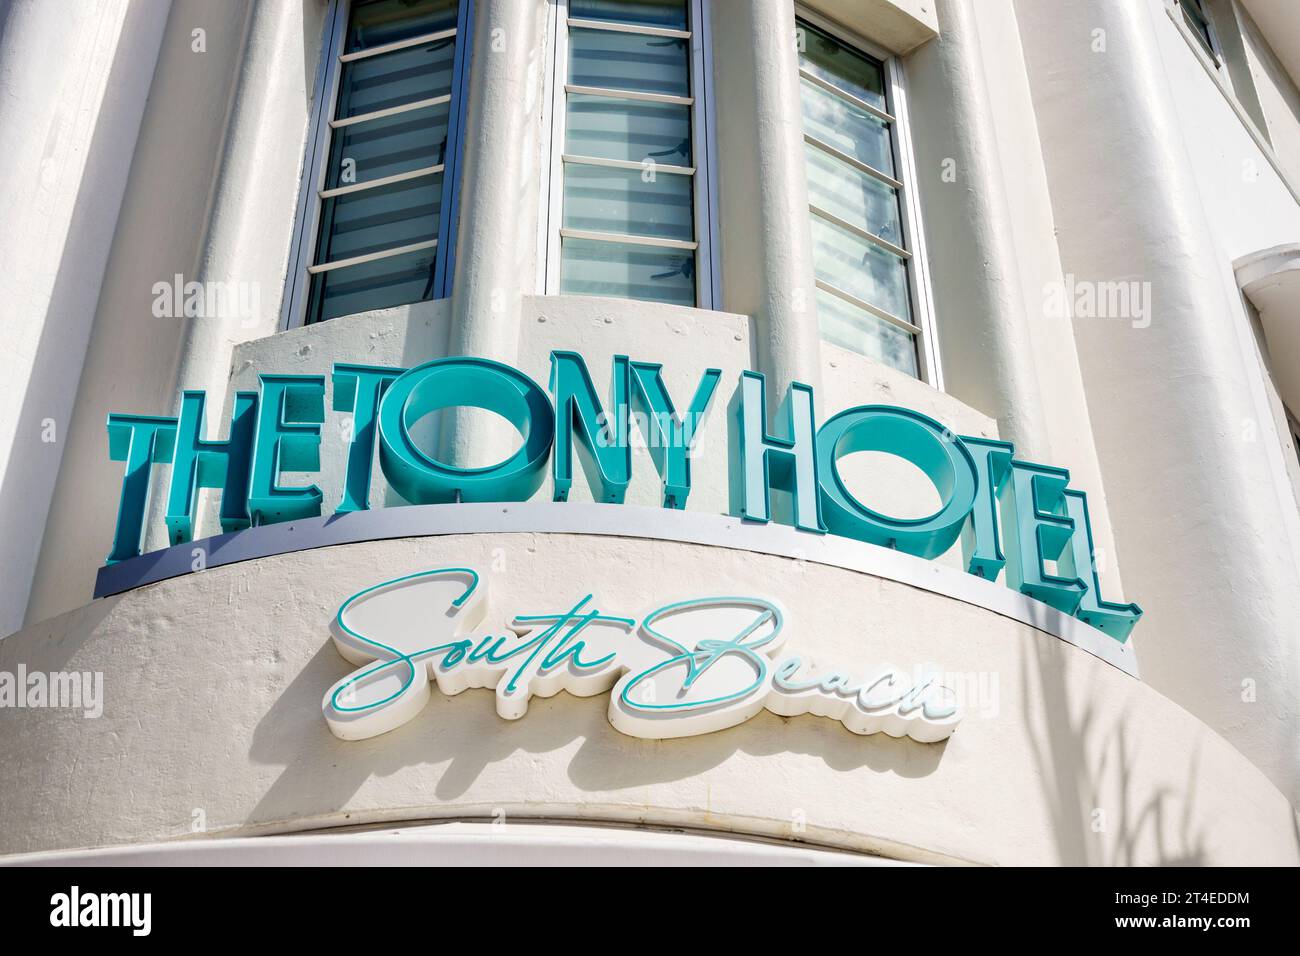 Miami Beach Florida,outside exterior,building front entrance hotel,Collins Avenue,The Tony Hotel South Beach sign,hotels motels businesses Stock Photo